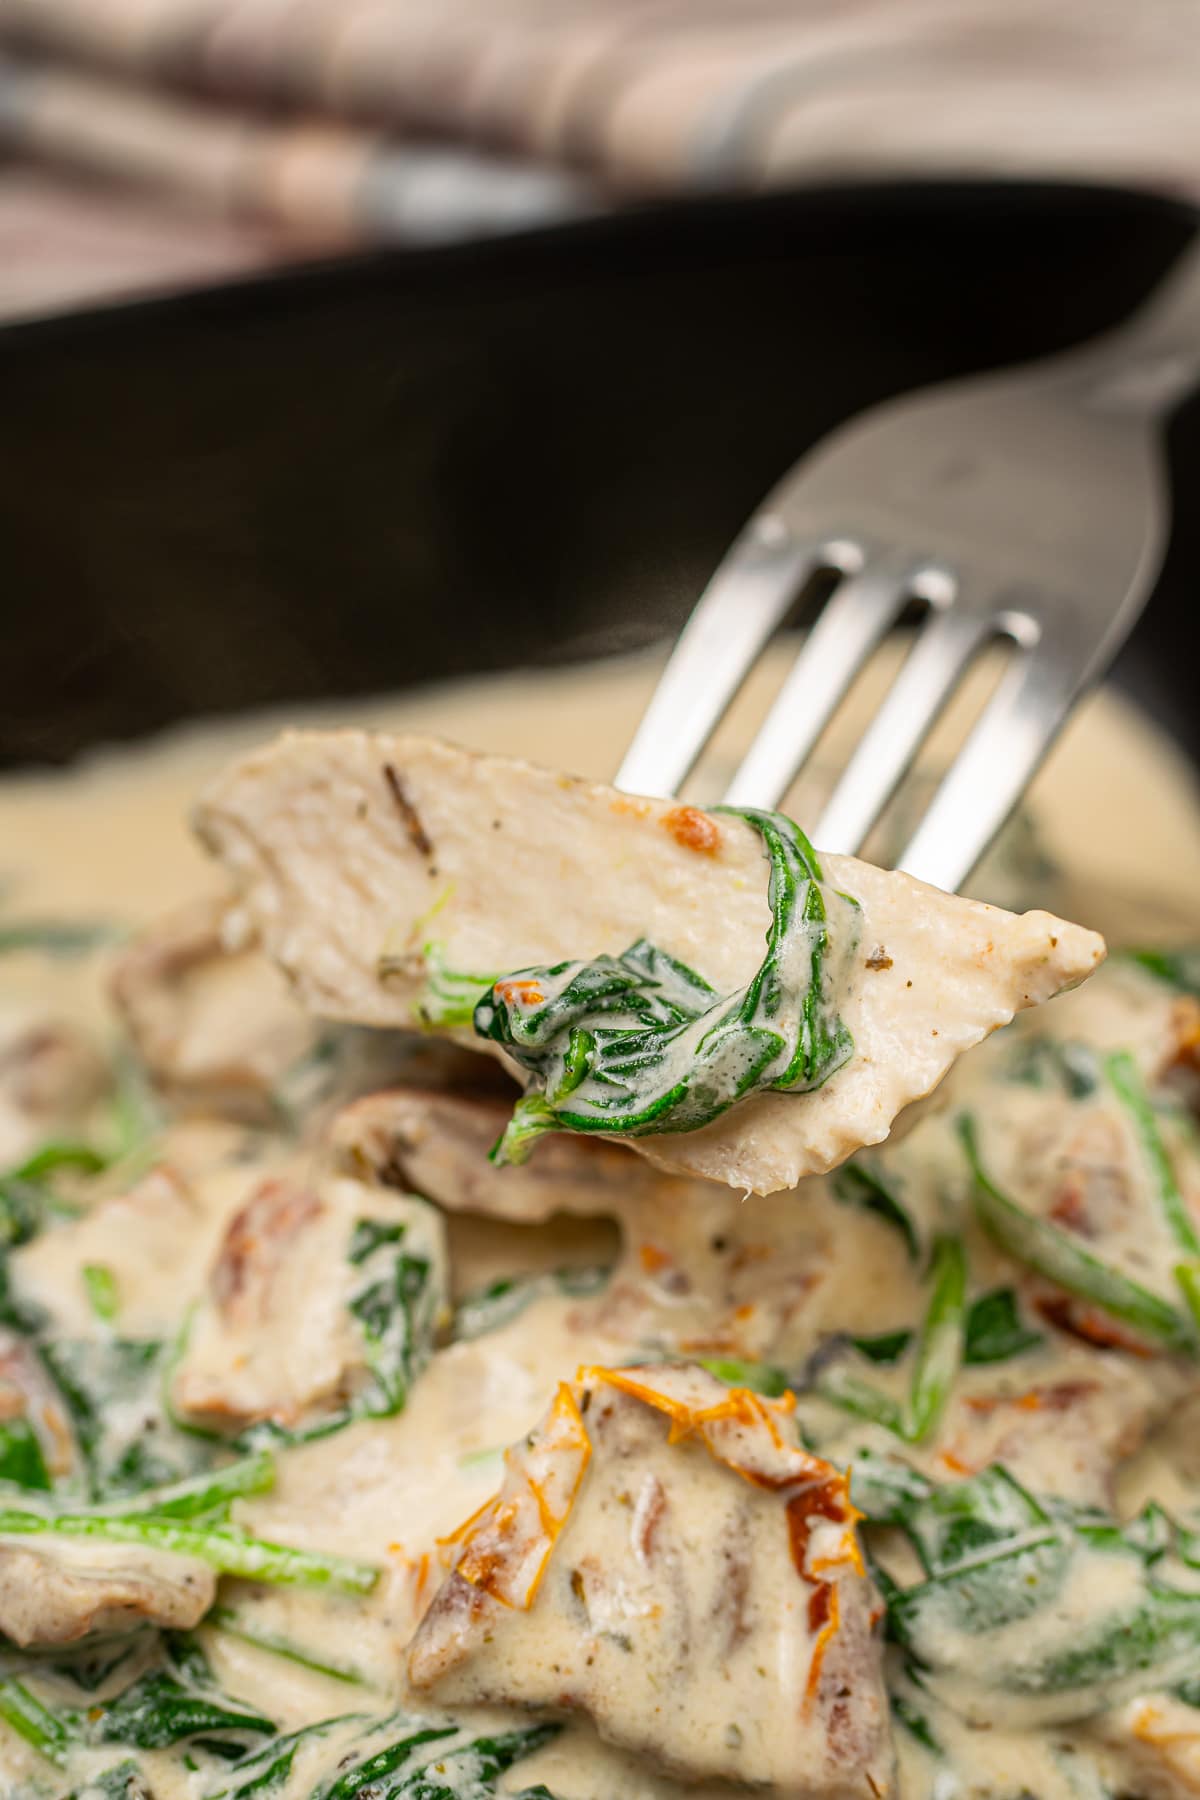 A close-up of a single piece of Tuscan chicken on a fork, showing the creamy sauce and wilted spinach on the chicken.